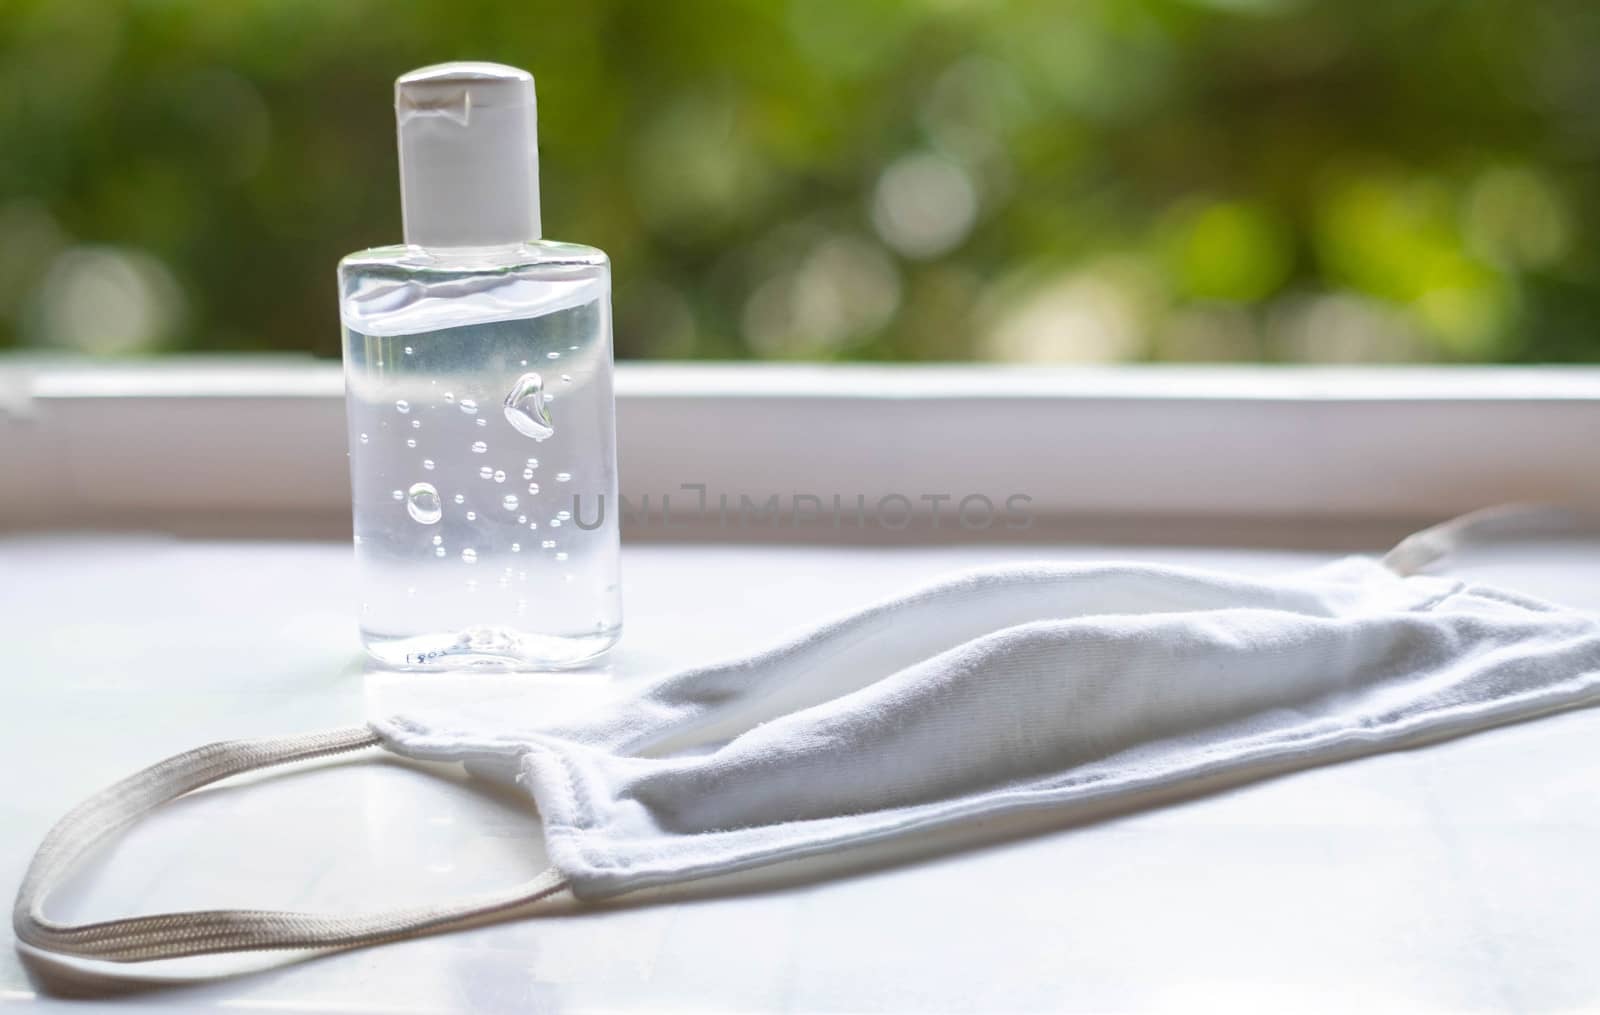 hand wash sanitizer and face mask on the white table  by Bonn2210